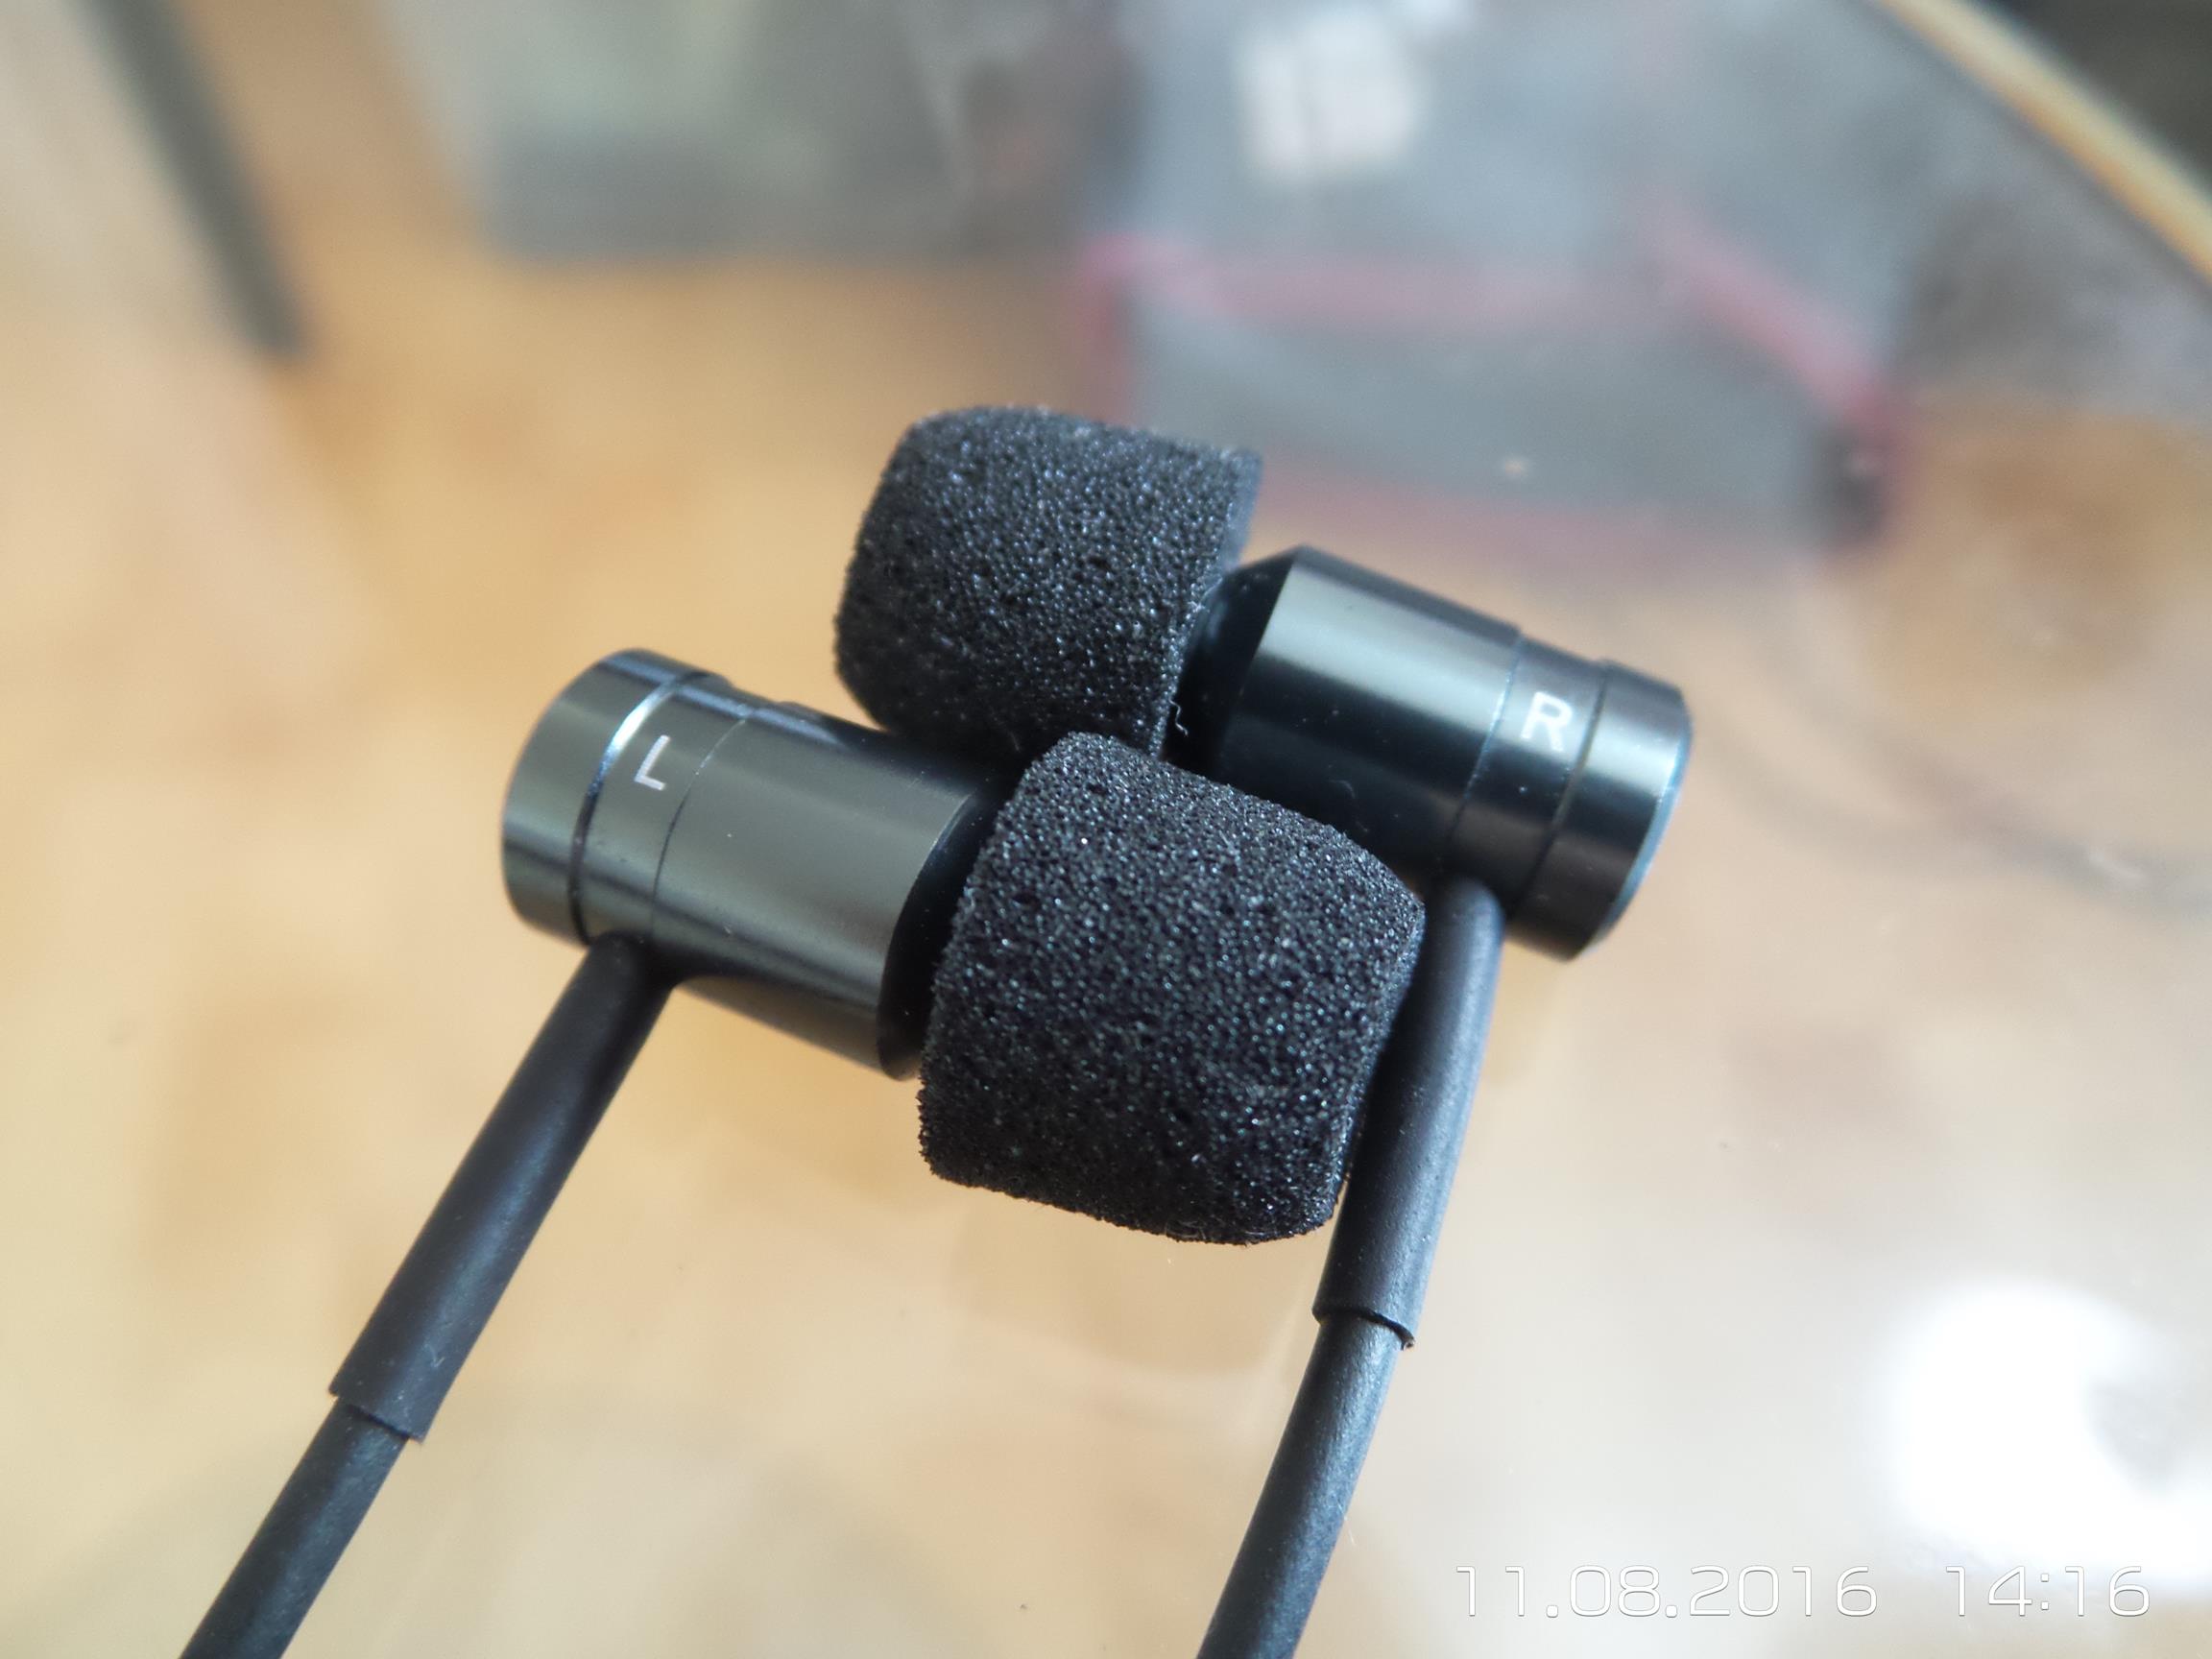 Rock Jaw Audio Clarito Quick Review by mark2410